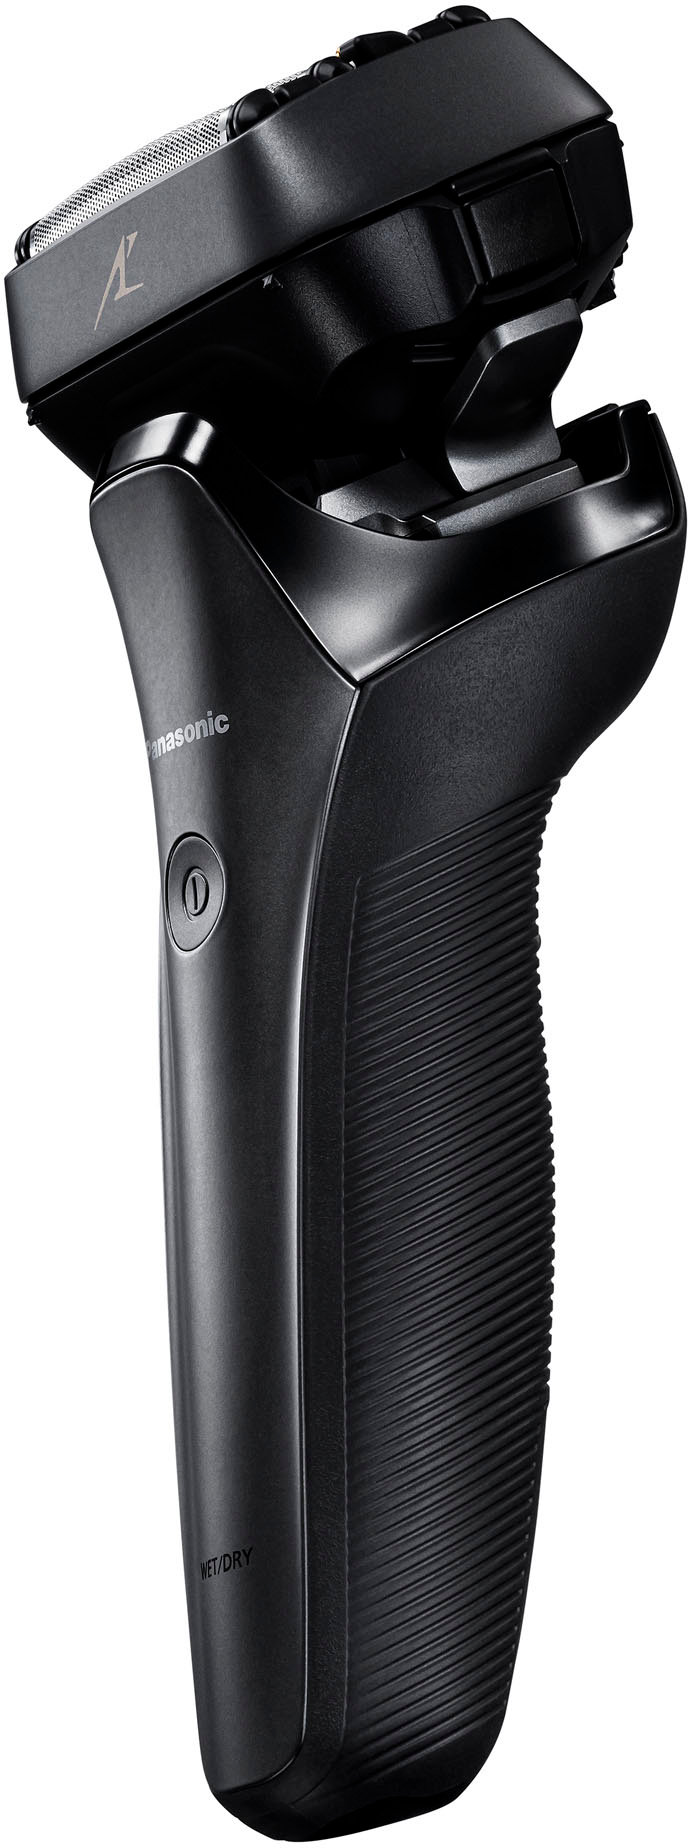 Panasonic Arc6 Six-Blade Wet/Dry Electric Shaver with Automatic